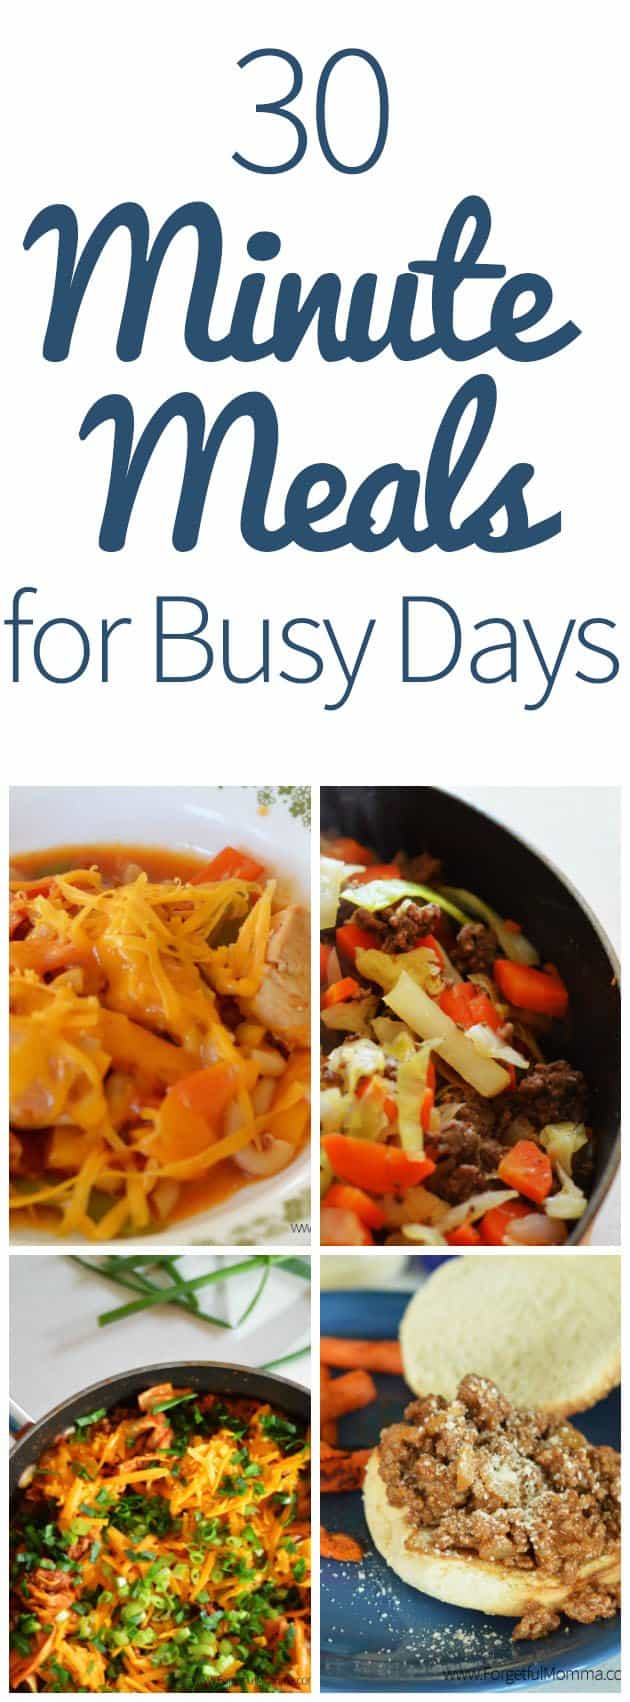 30 Minute Meals for Busy Days